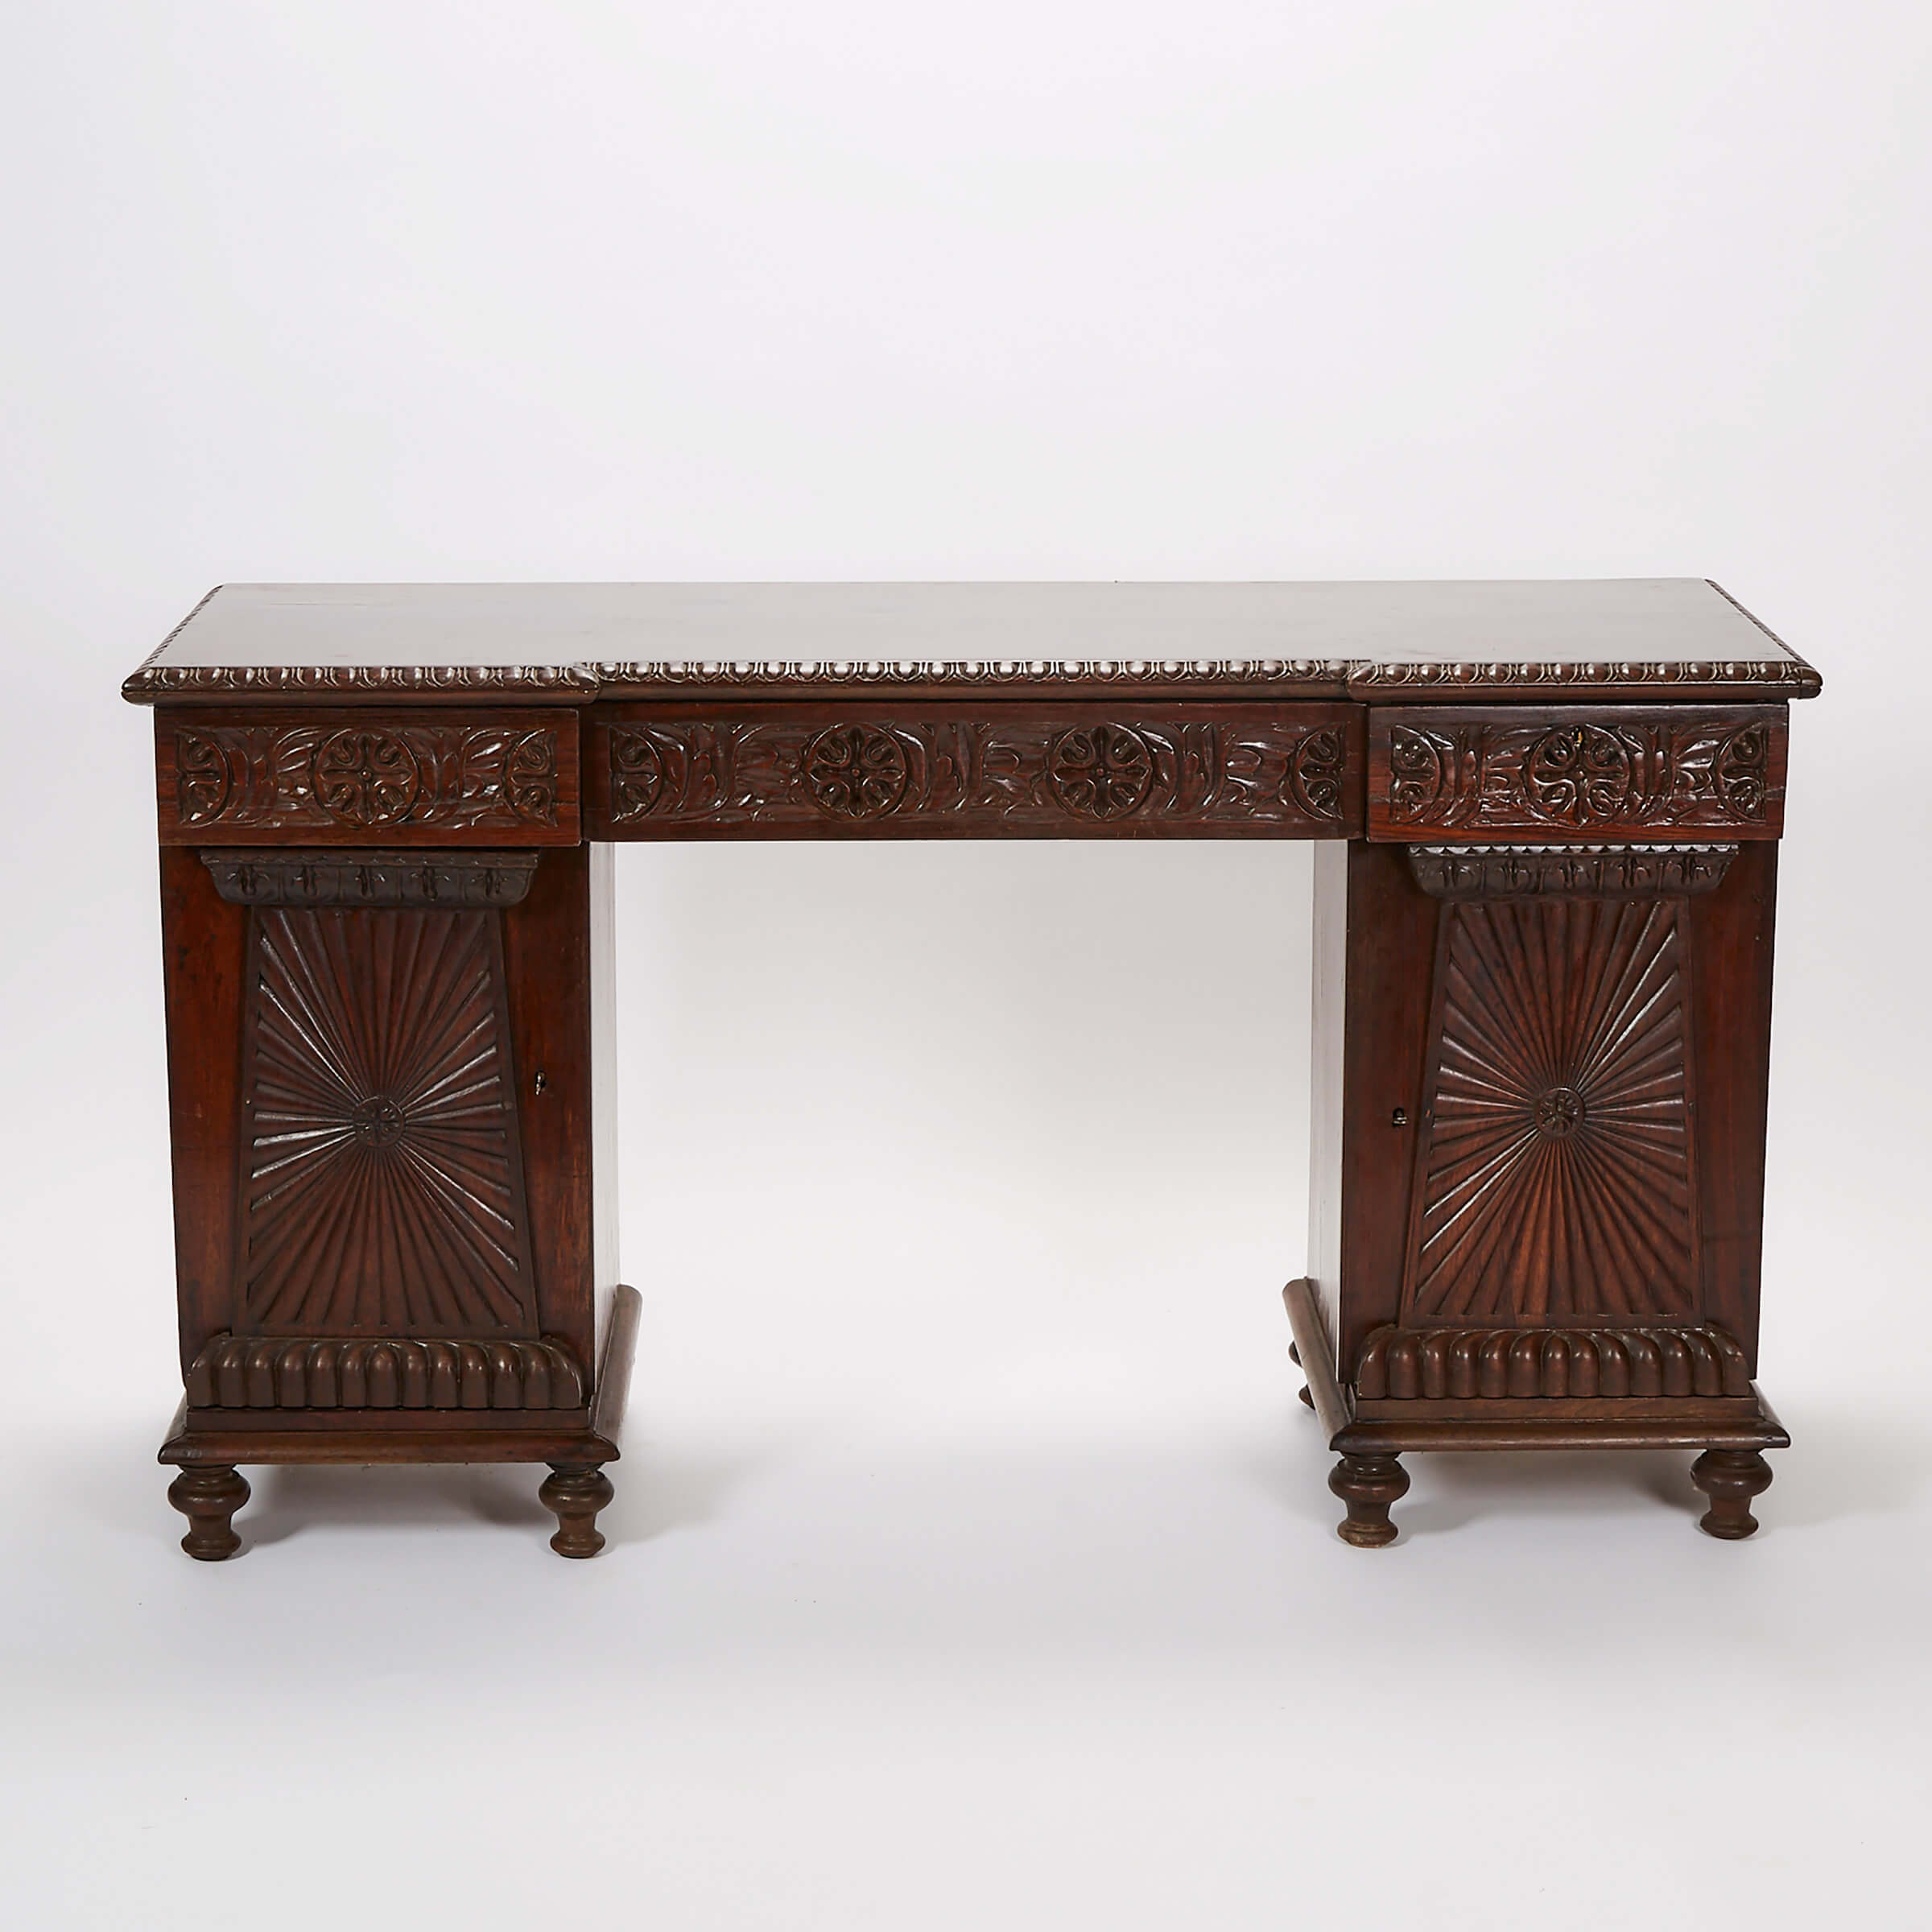 Anglo-Indian Carved Rosewood Sideboard, c.1830